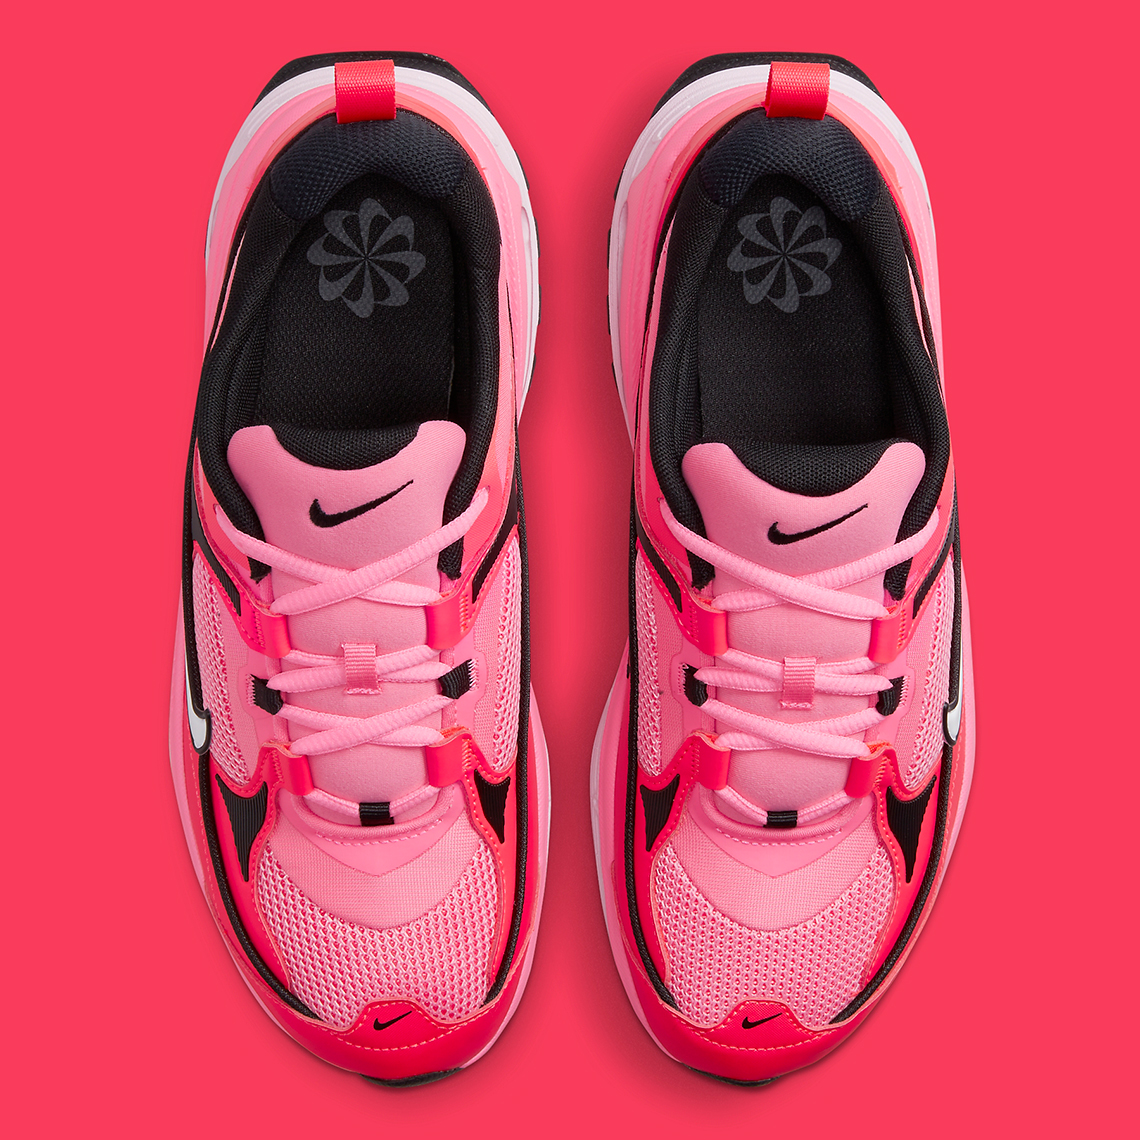 Nike Air Max Bliss Laser Pink DH5128 600 4